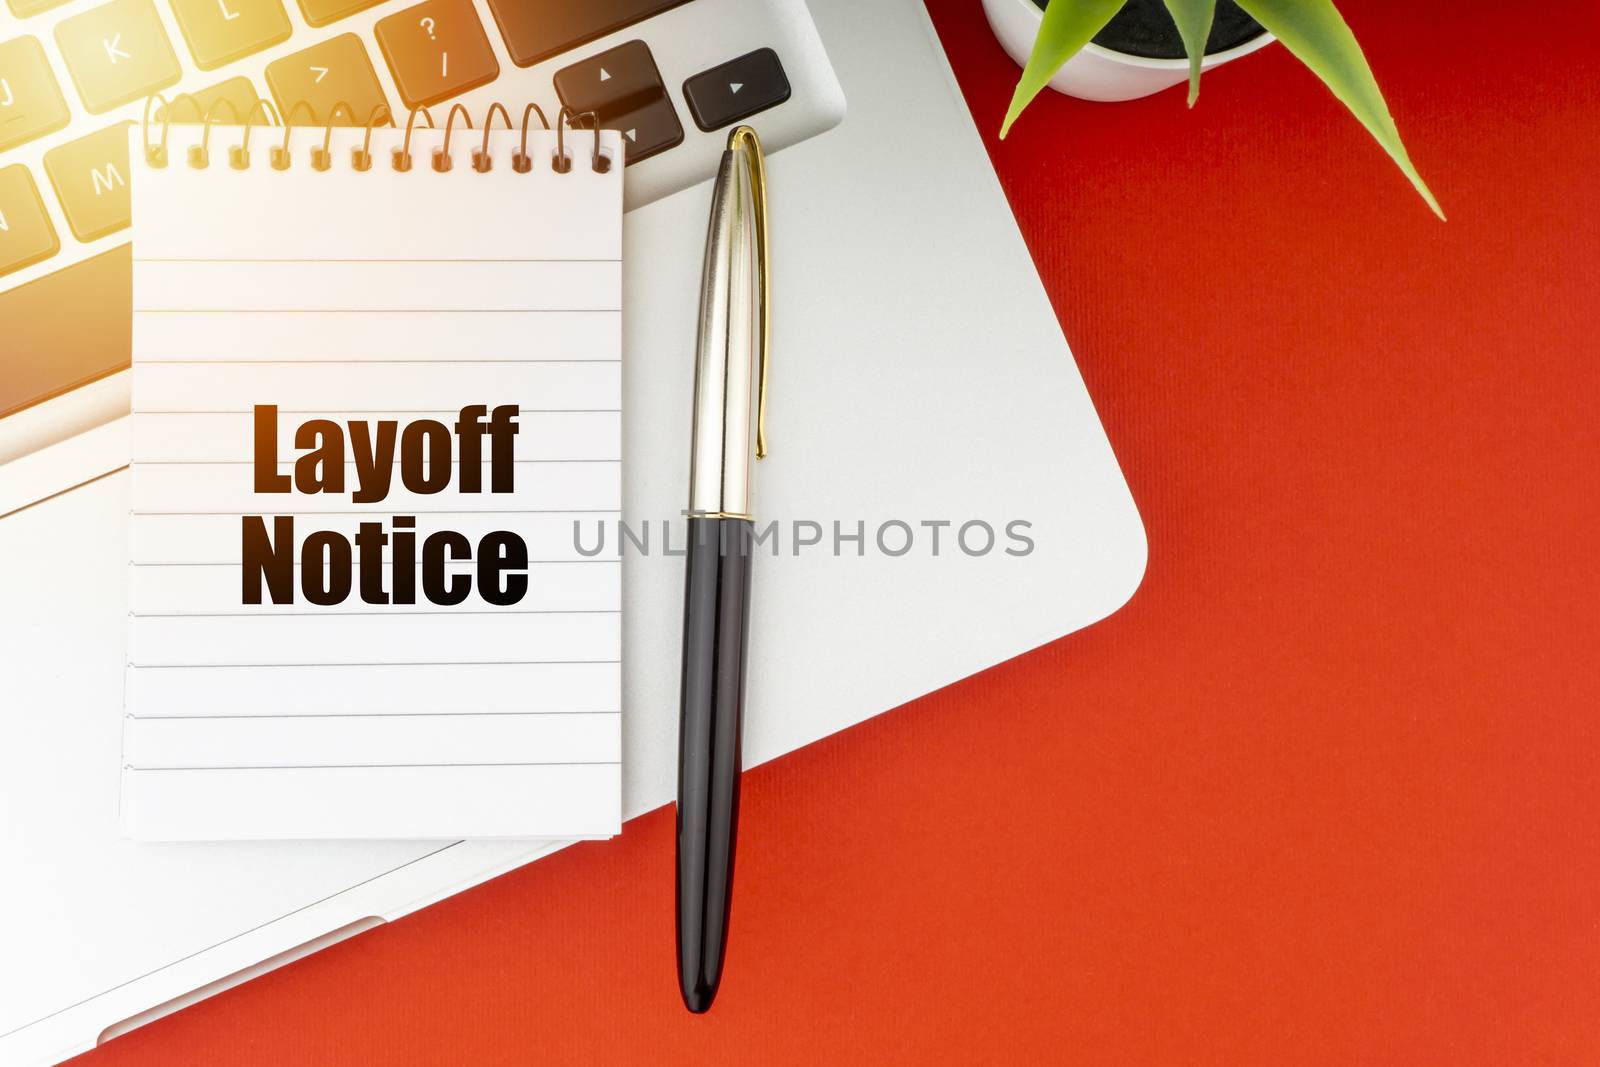 LAYOFF NOTICE text with notepad, laptop, fountain pen and decorative plant on red background. by silverwings